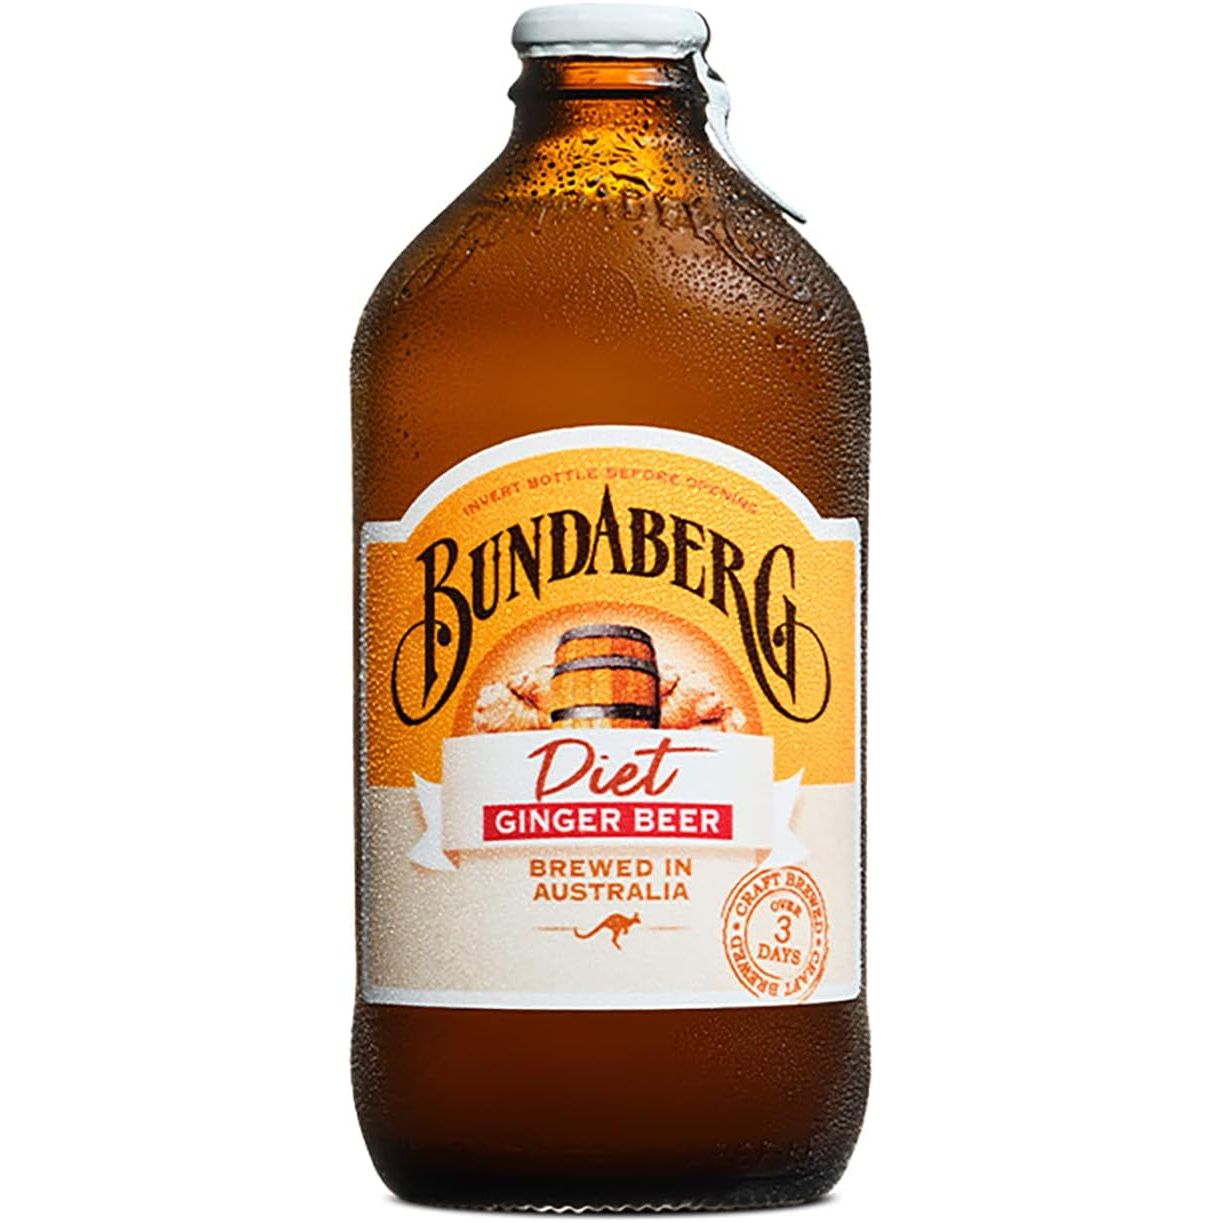 Bundaberg Diet Ginger Beer Glass Bottle 375ml 24ct (Pallet Shipping Only) (Shipping Extra, Click for Details)